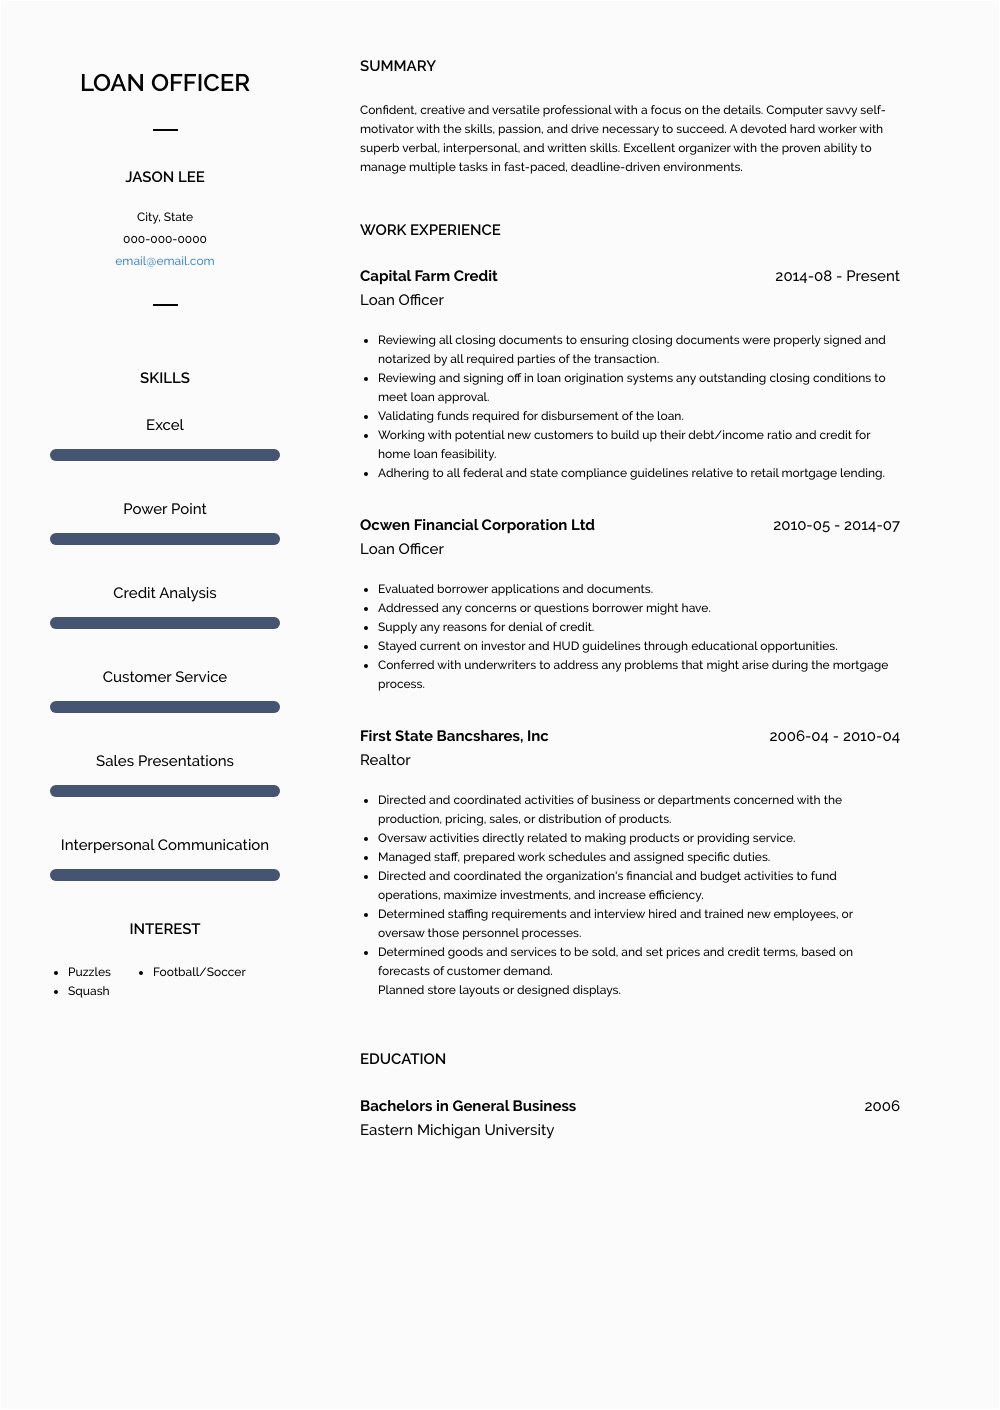 Sample Resume for Auto Loan Officer Loan Ficer Resume Samples and Templates